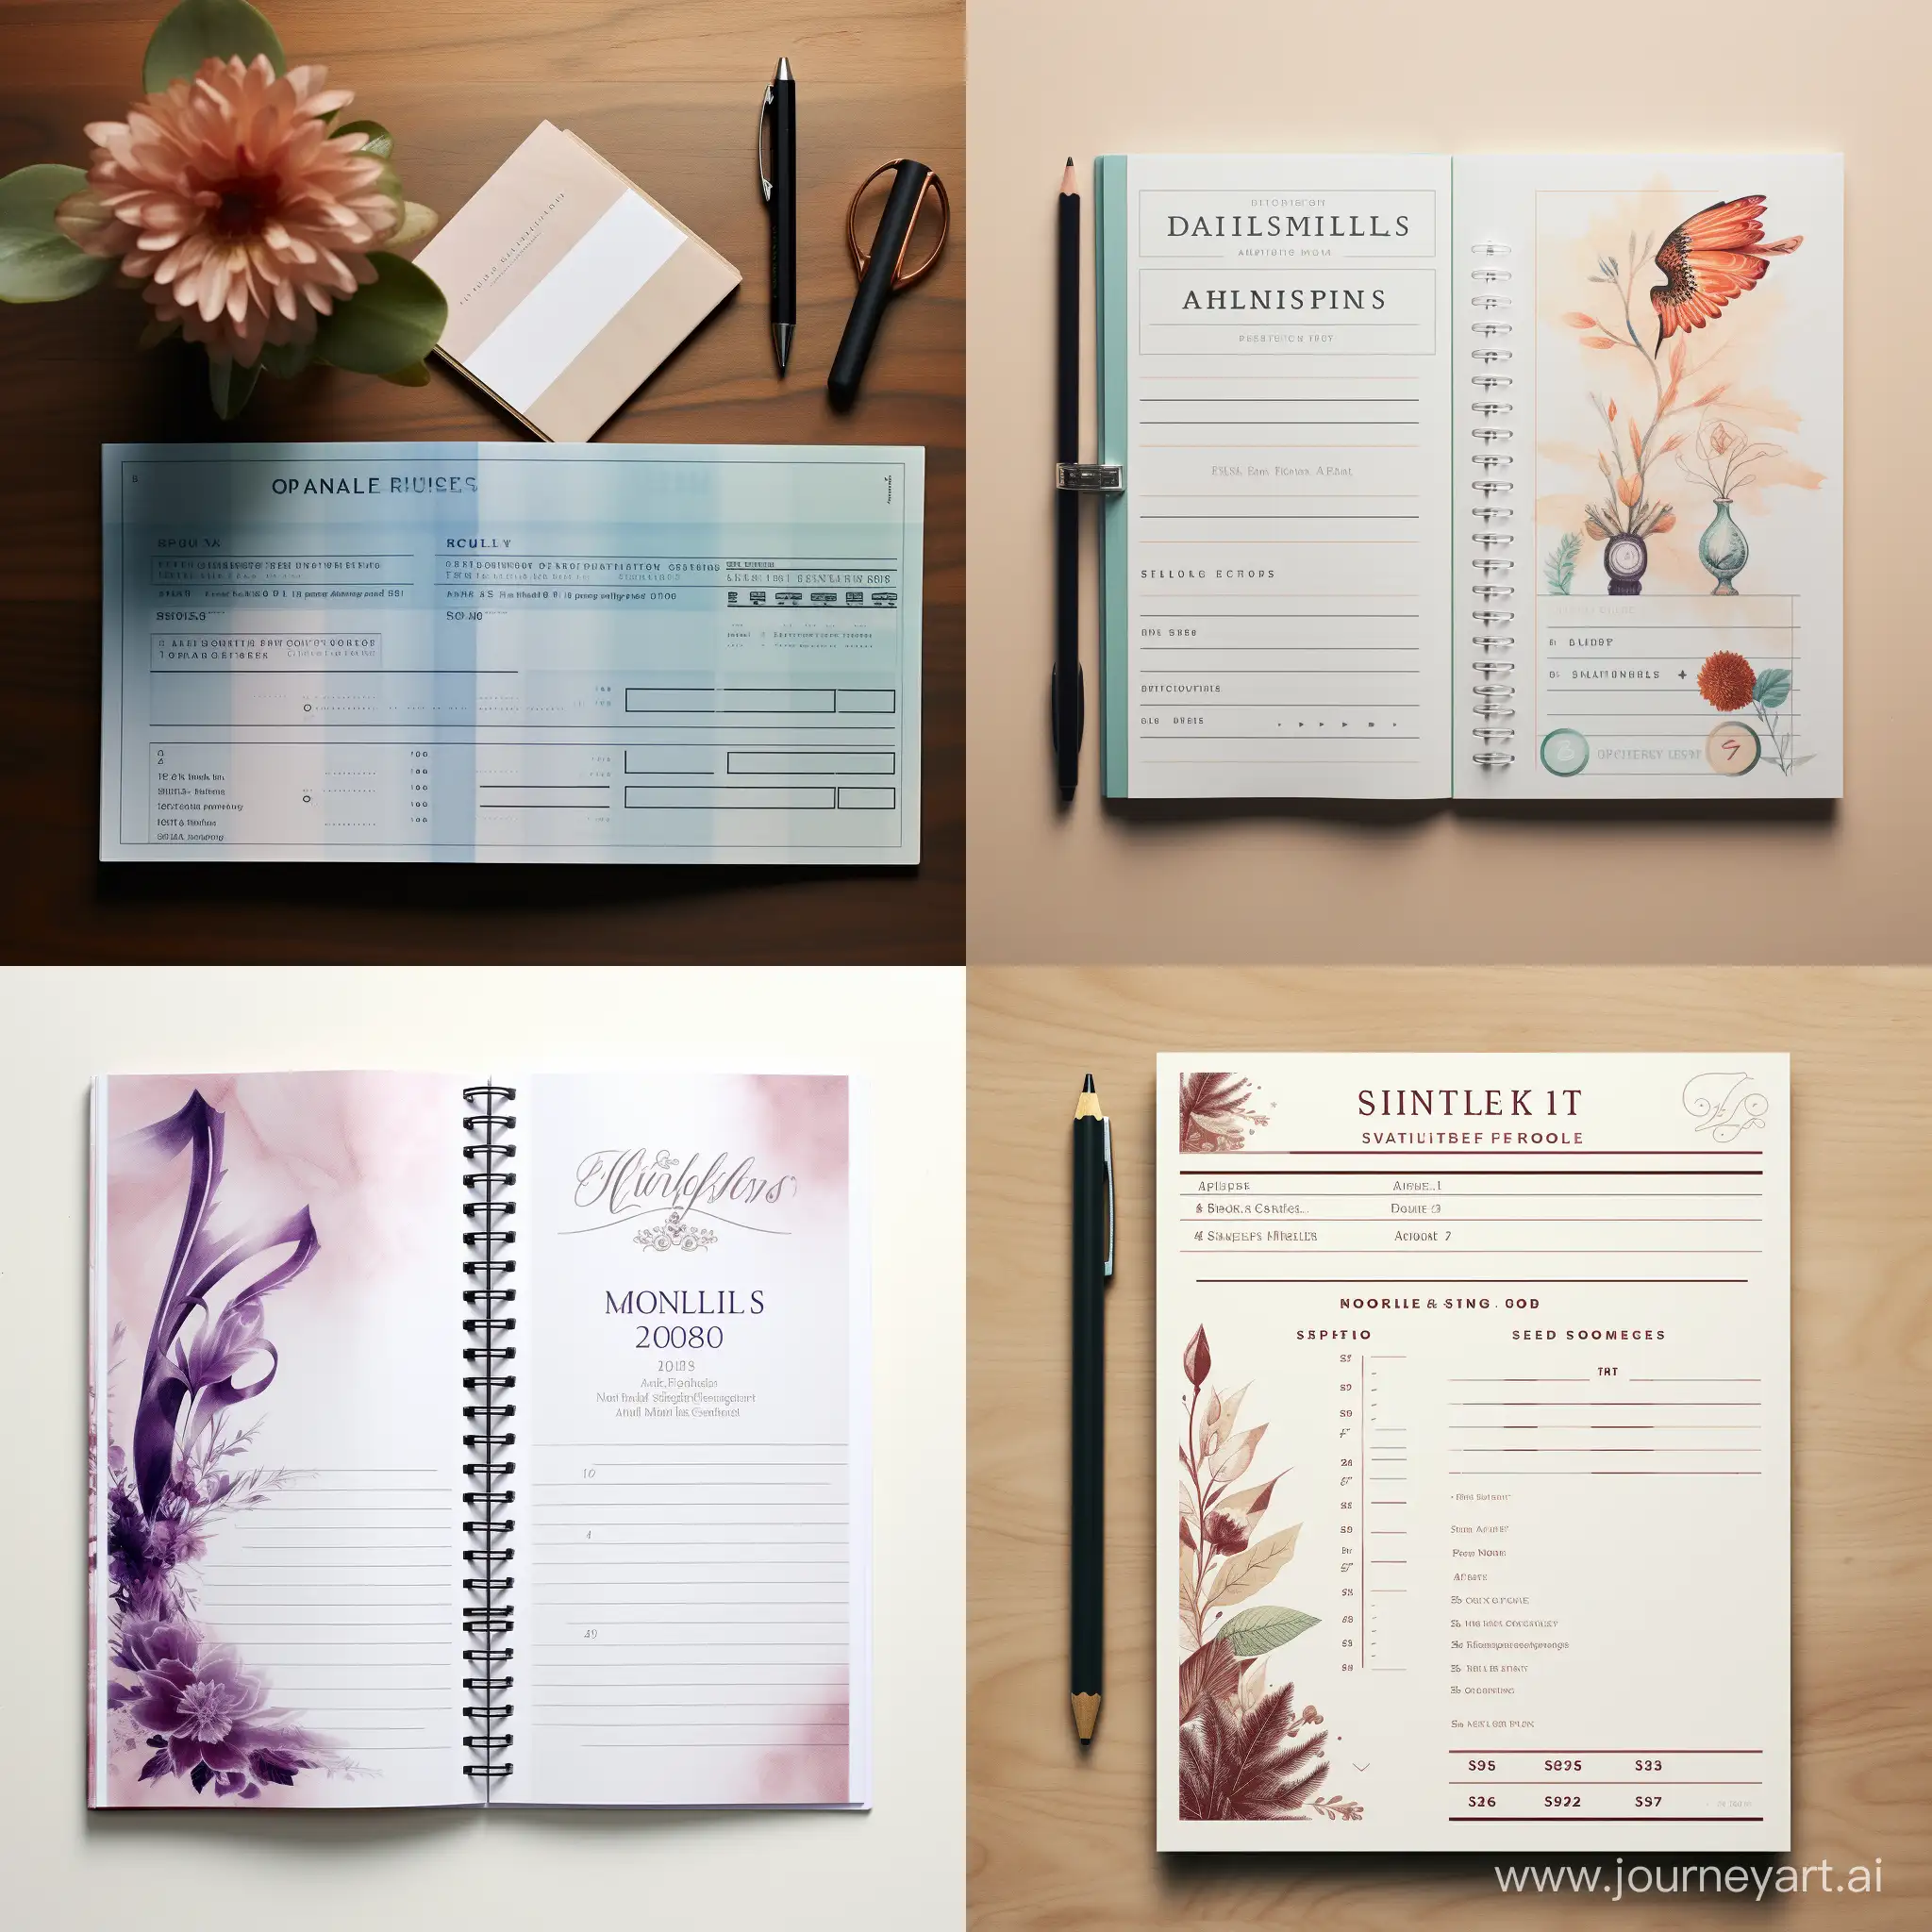 Personalized bill books convey professional impression towards your clients. Alprints provides a variety of templates to make your bill book